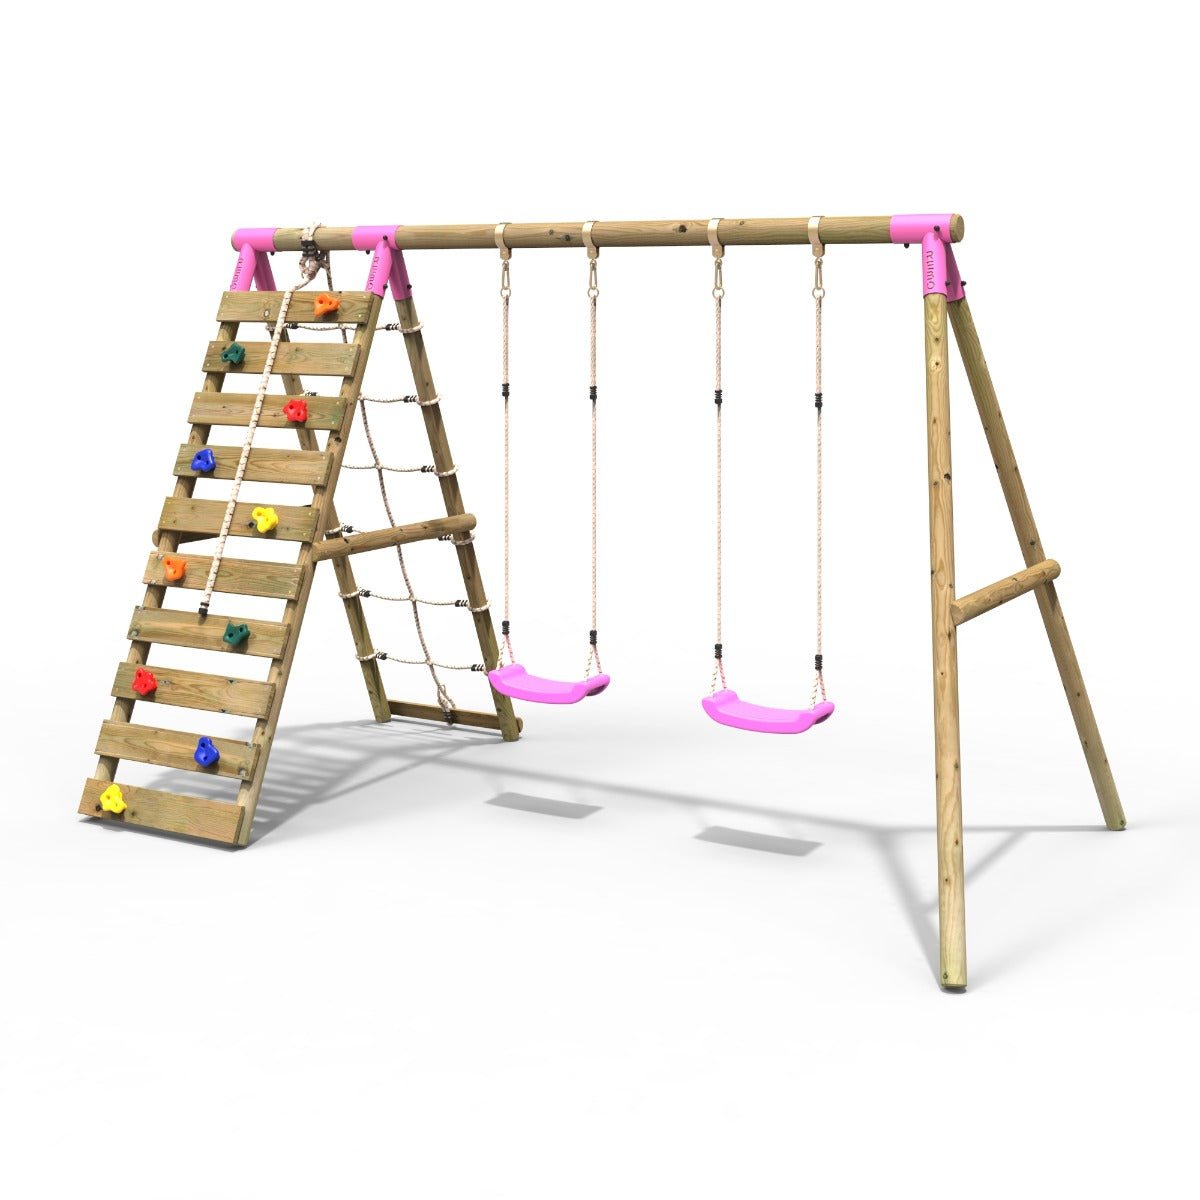 Rebo Wooden Swing Set with Up and Over Climbing Wall - Ela Pink